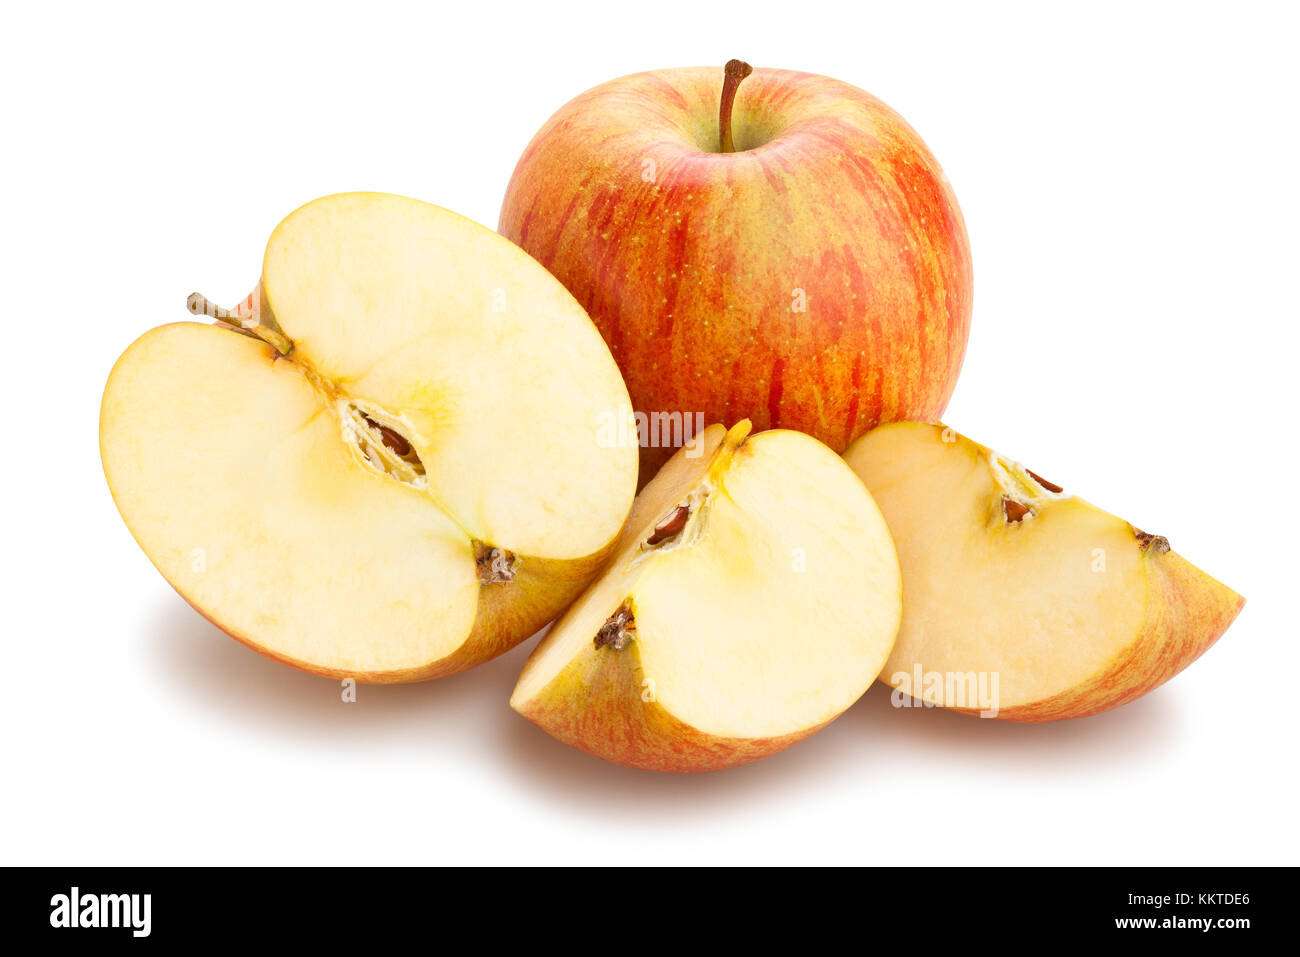 striped apples path isolated sliced Stock Photo